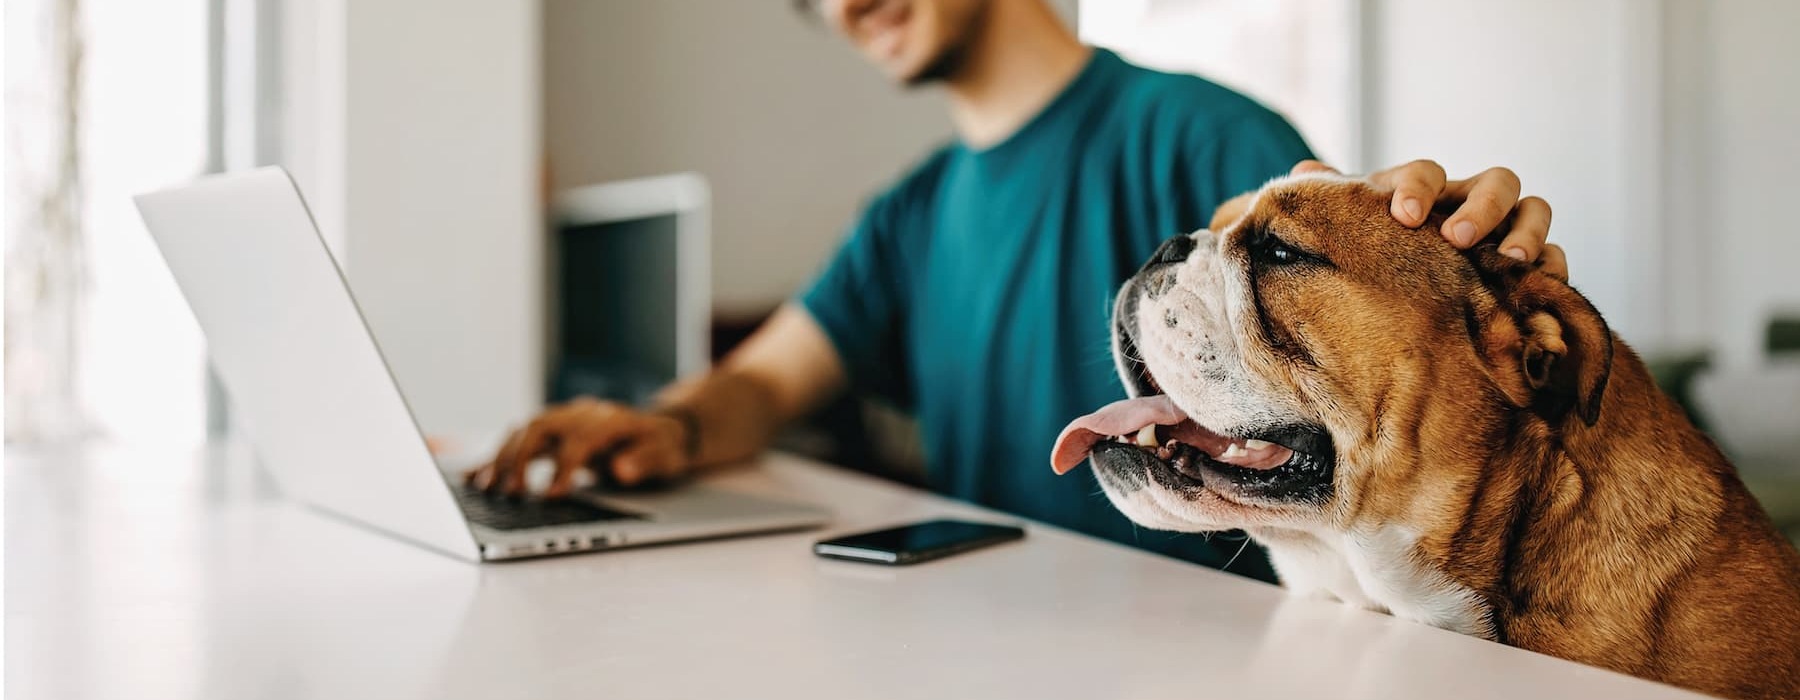 lifestyle image of a man working on a laptop beside his dog